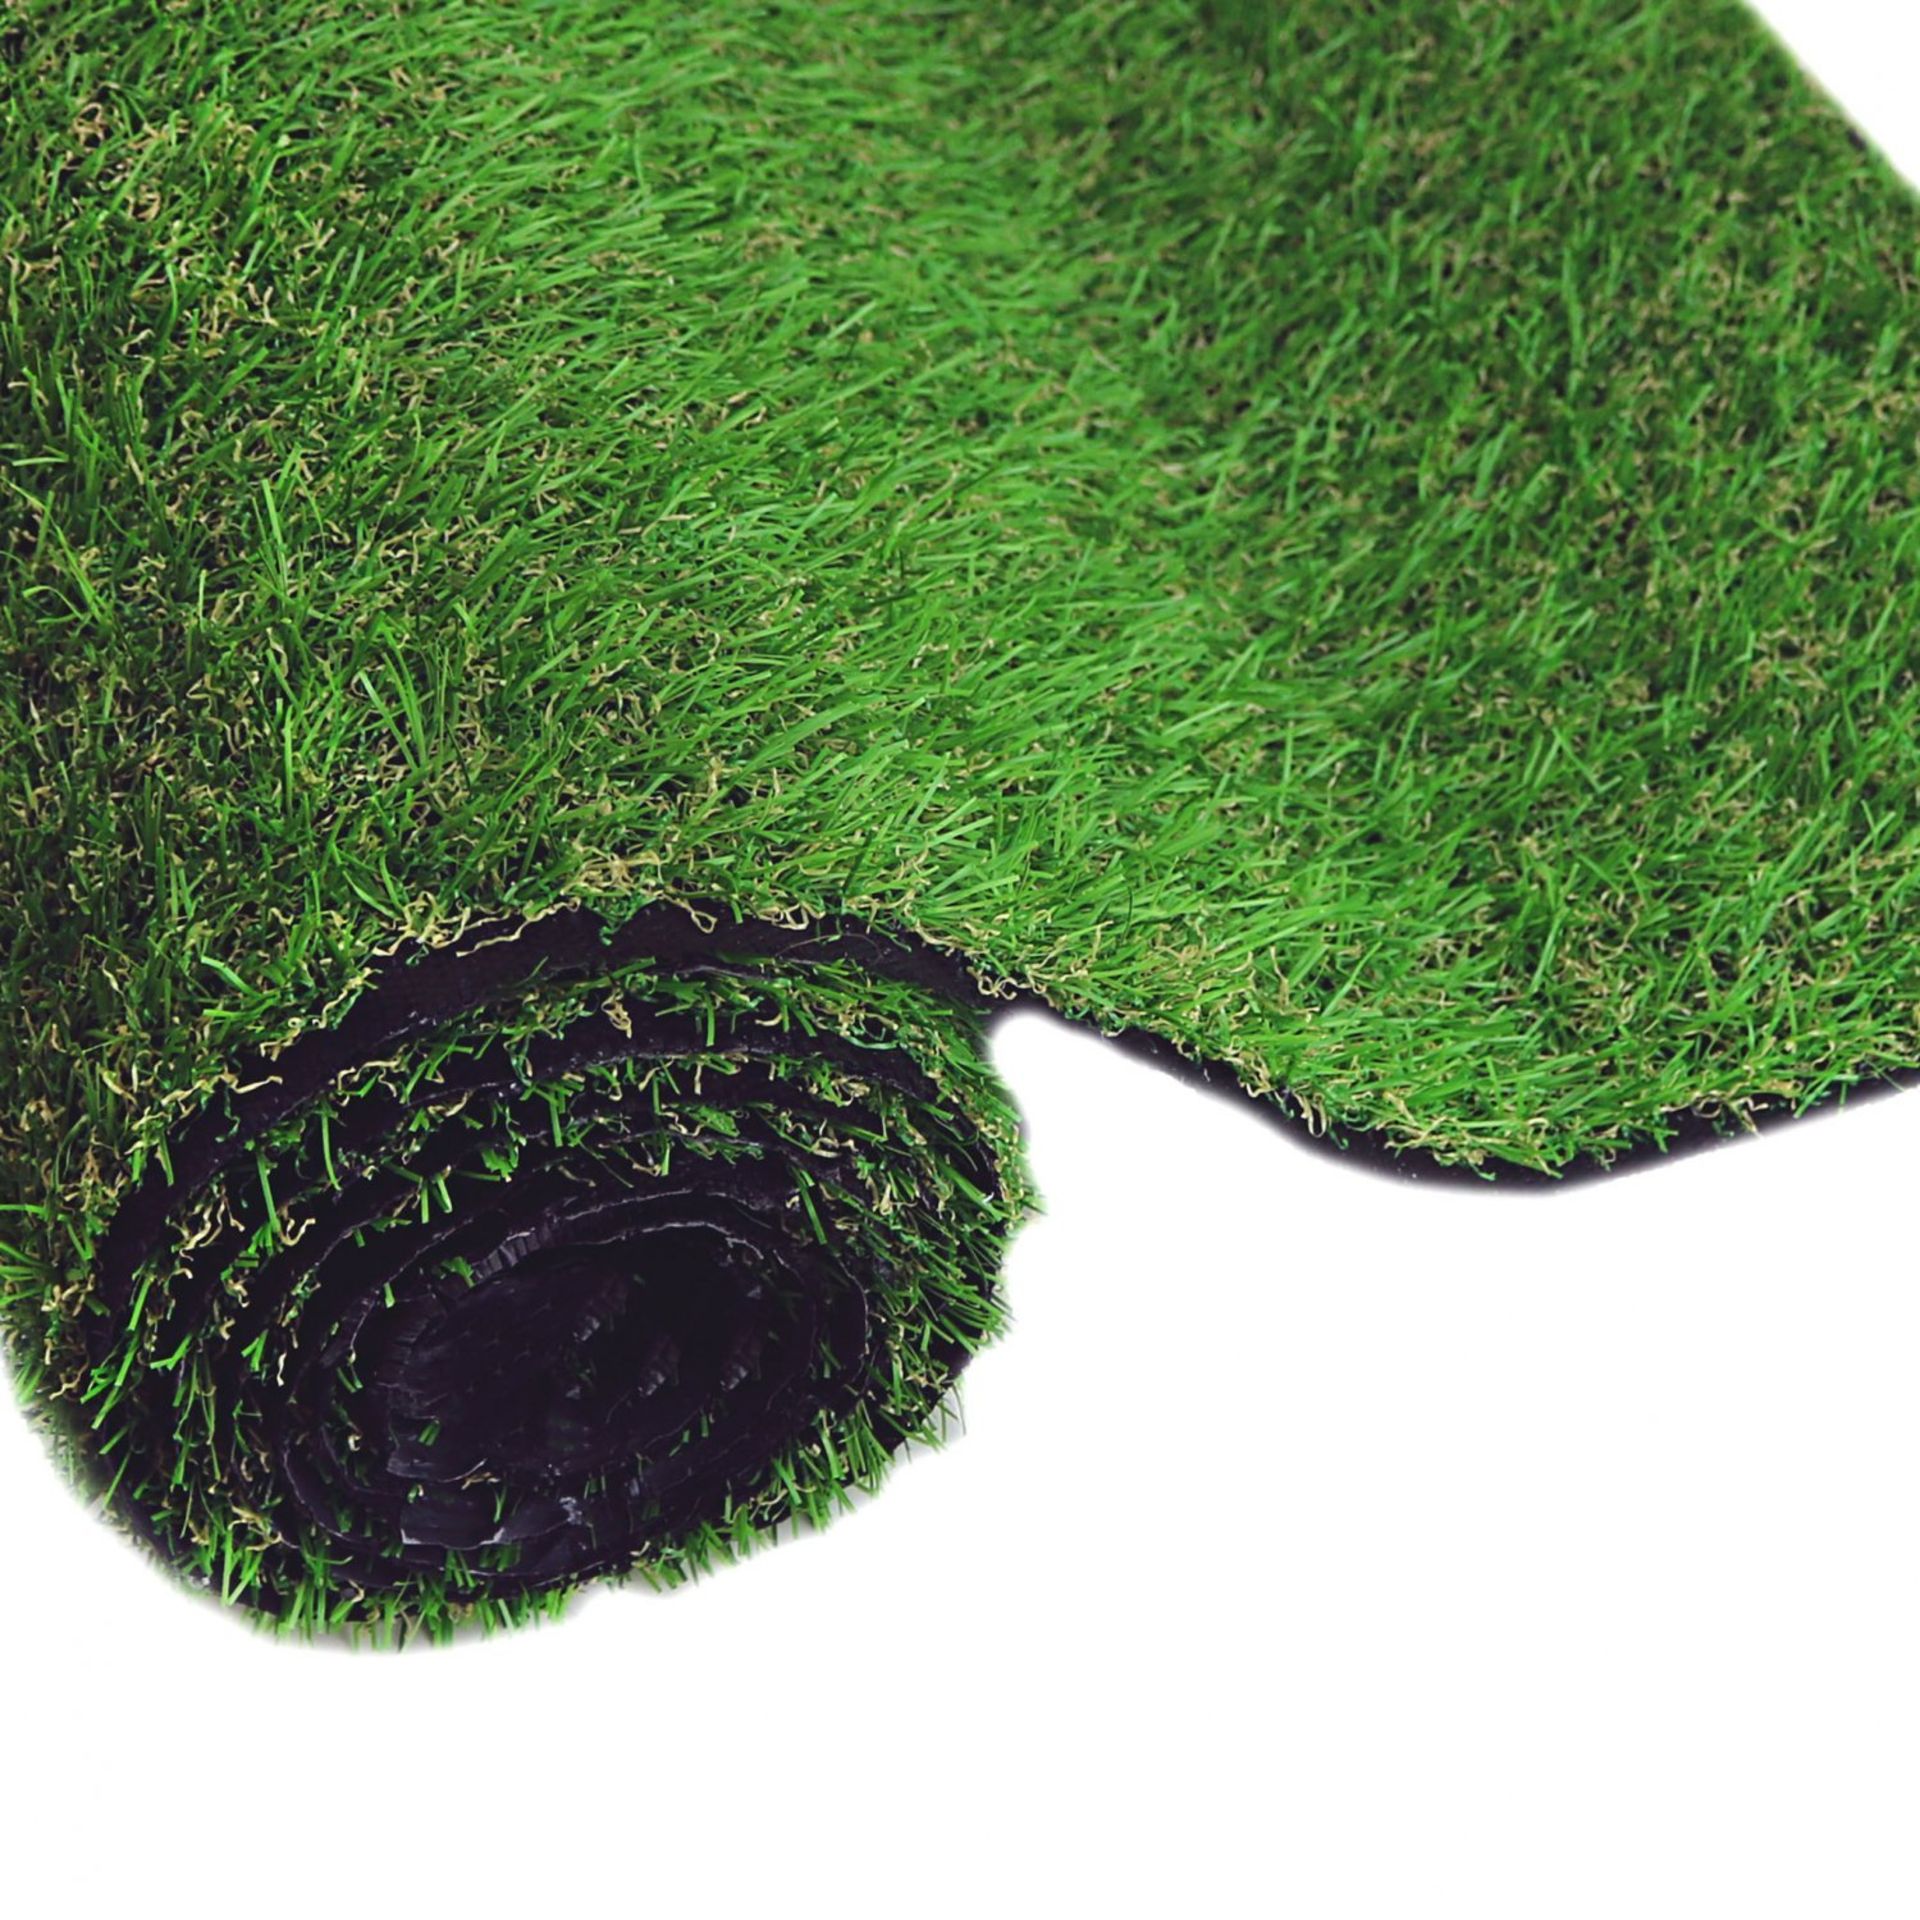 (QW5) 17mm Artificial Grass Mat 6ft x 3ft Greengrocers Fake Turf Lawn Quality Water Resistant ... - Image 2 of 2